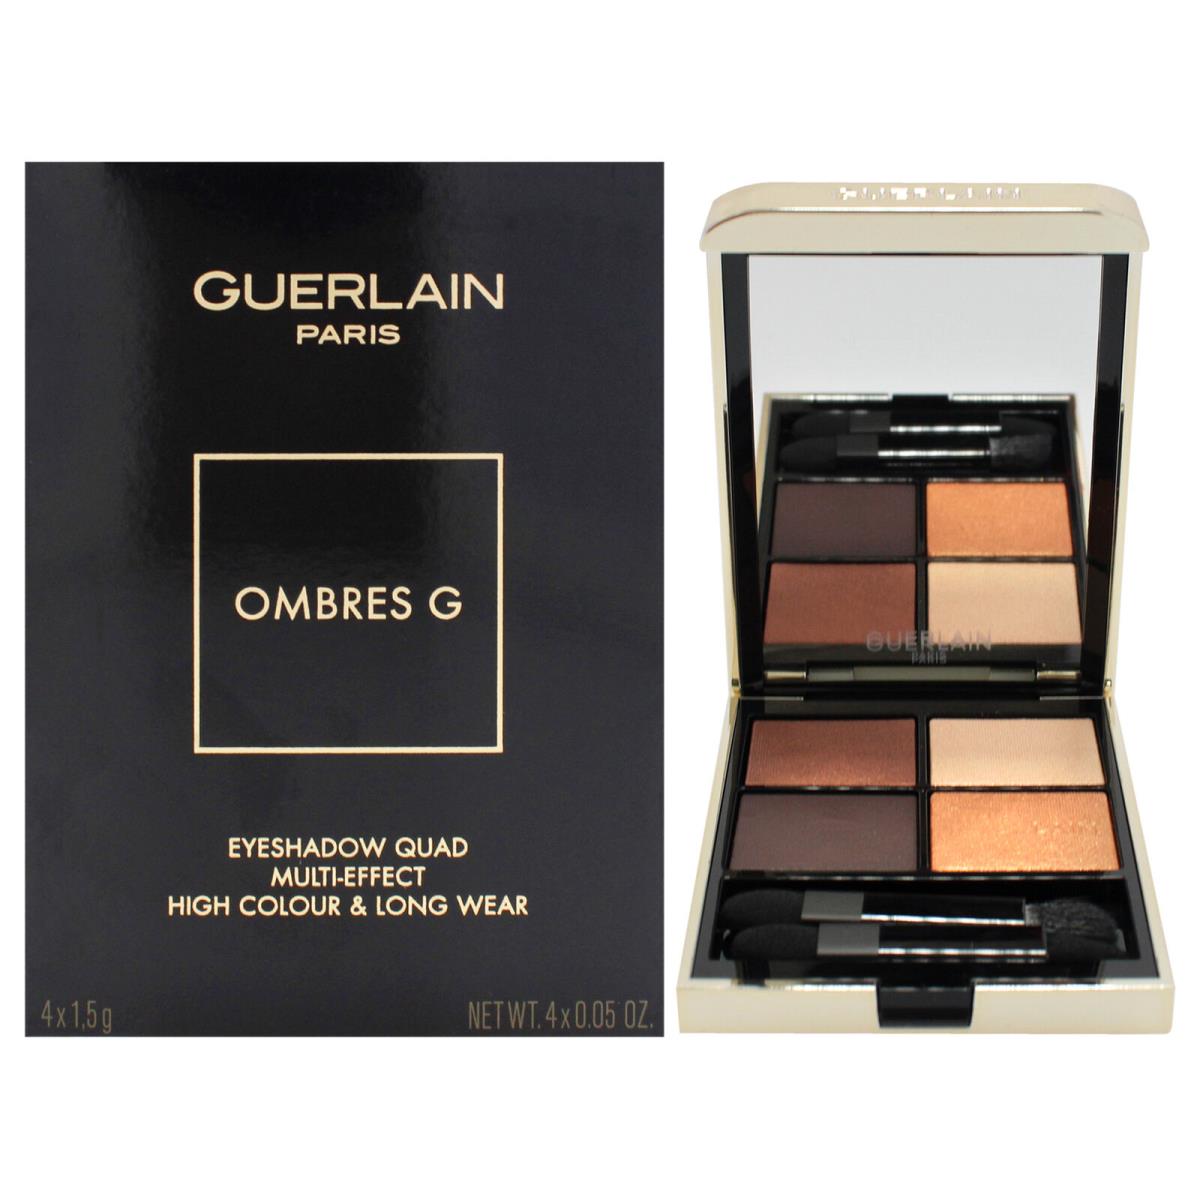 Ombres G Eyeshadow Quad - 940 Royal Jungle by Guerlain For Women - 0.05 oz